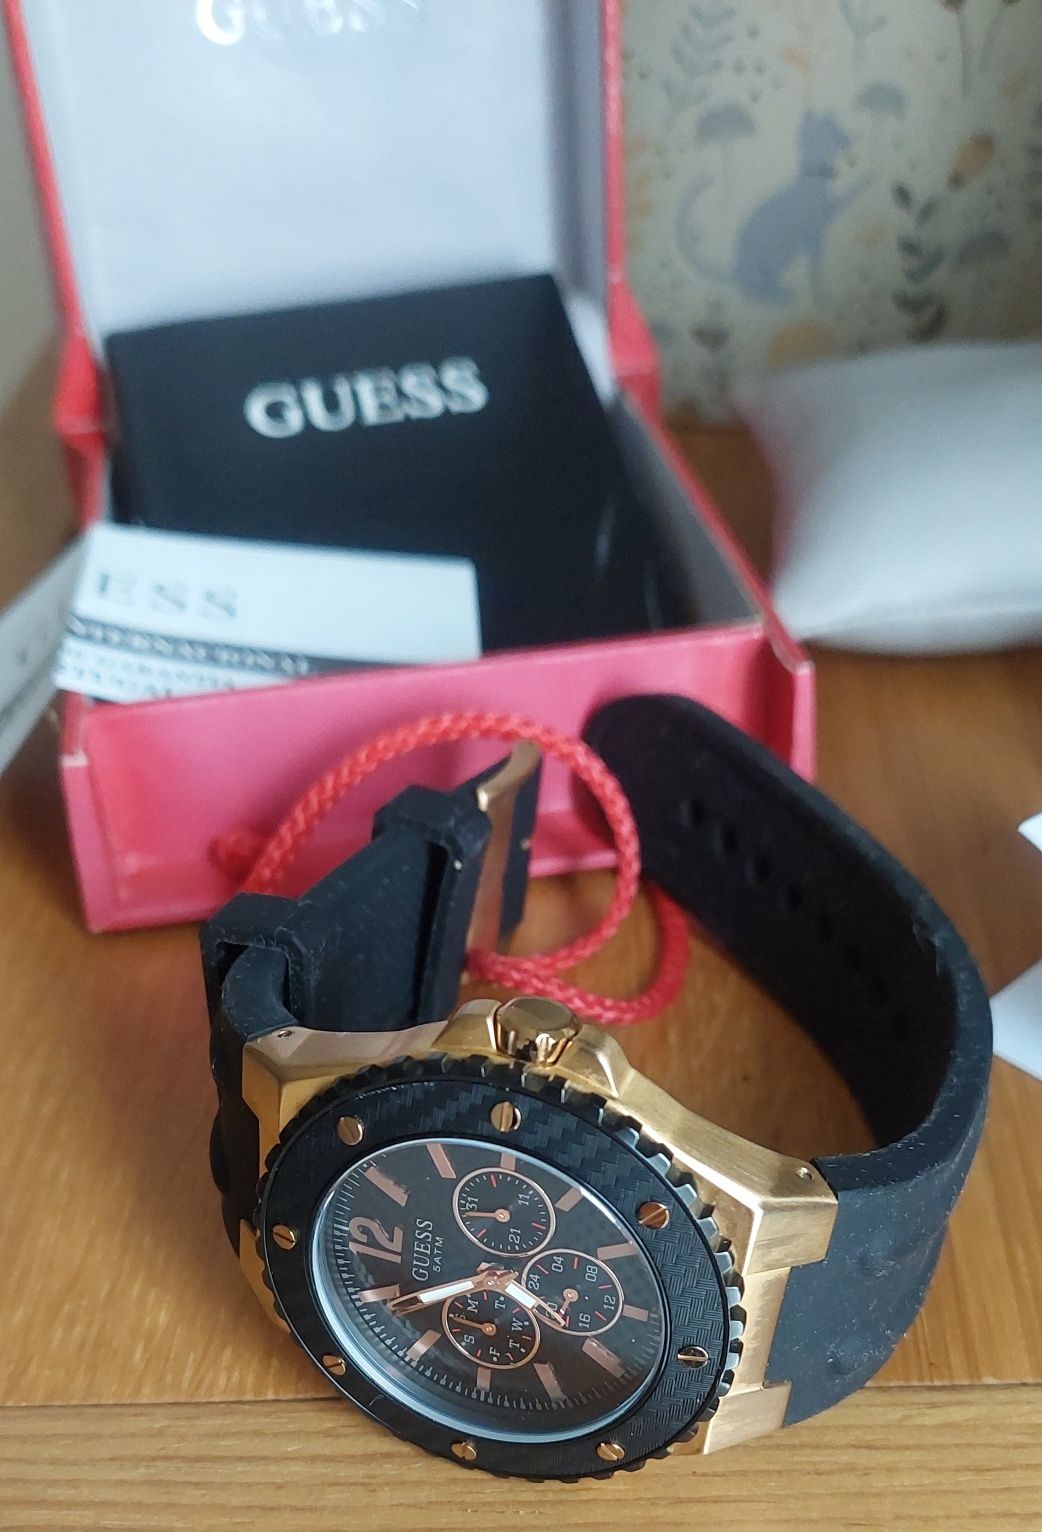 Relógio Guess 45 mm